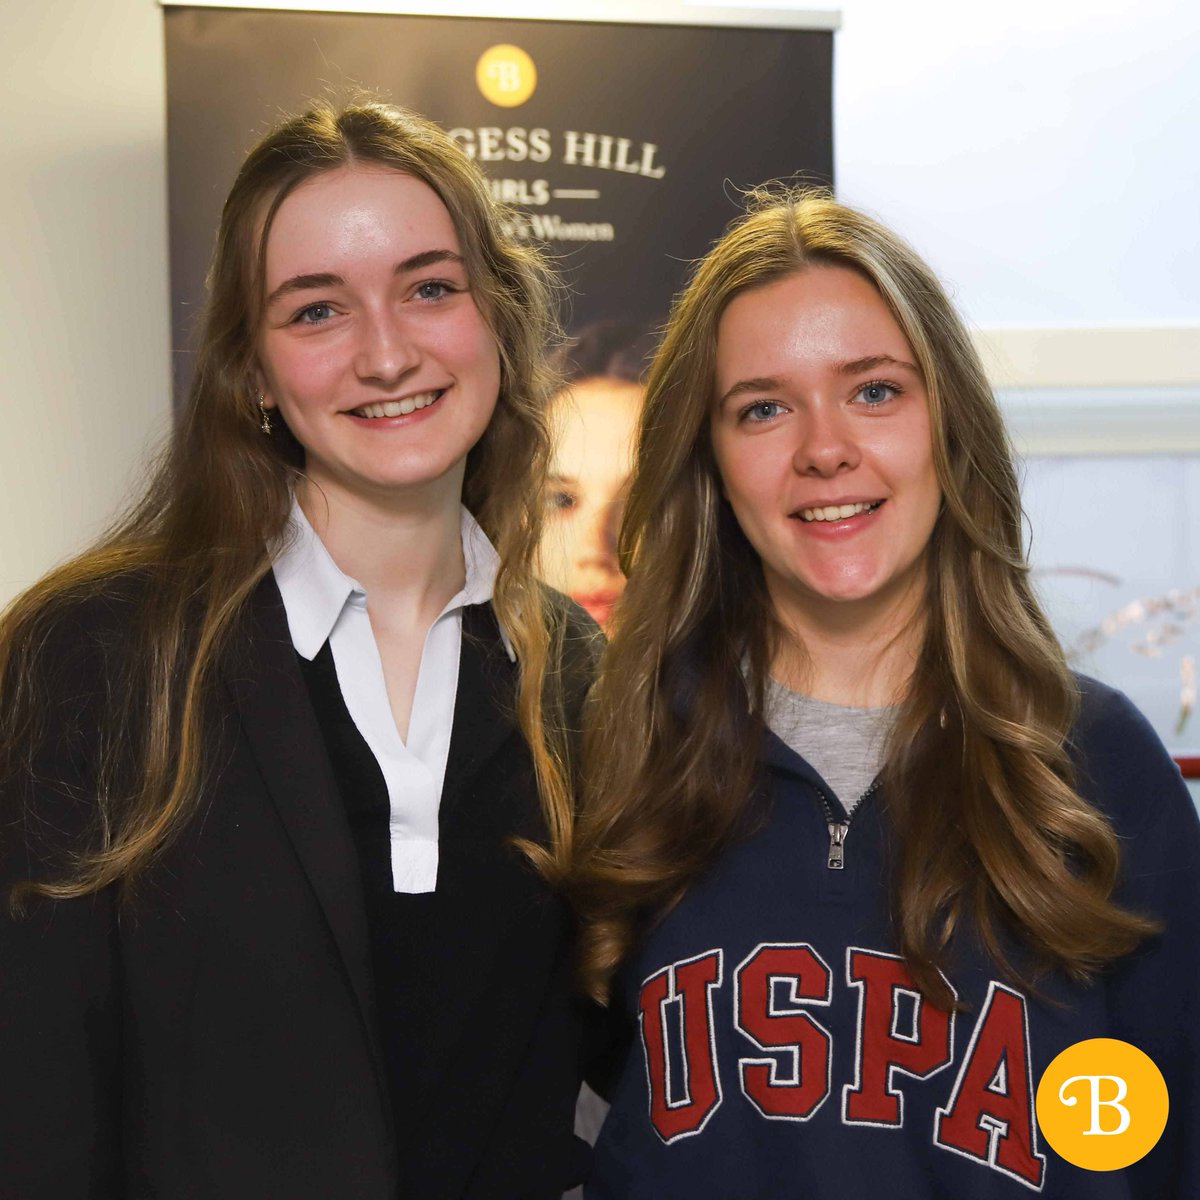 We are delighted for Upper Sixth students Caitlinn and Poppy, who have recently received offers to study Musical Theatre and Acting at leading European Conservatoires Trinity Laban and Leeds. 🎭 Read more on our website ➡️ eu1.hubs.ly/H08hKnh0